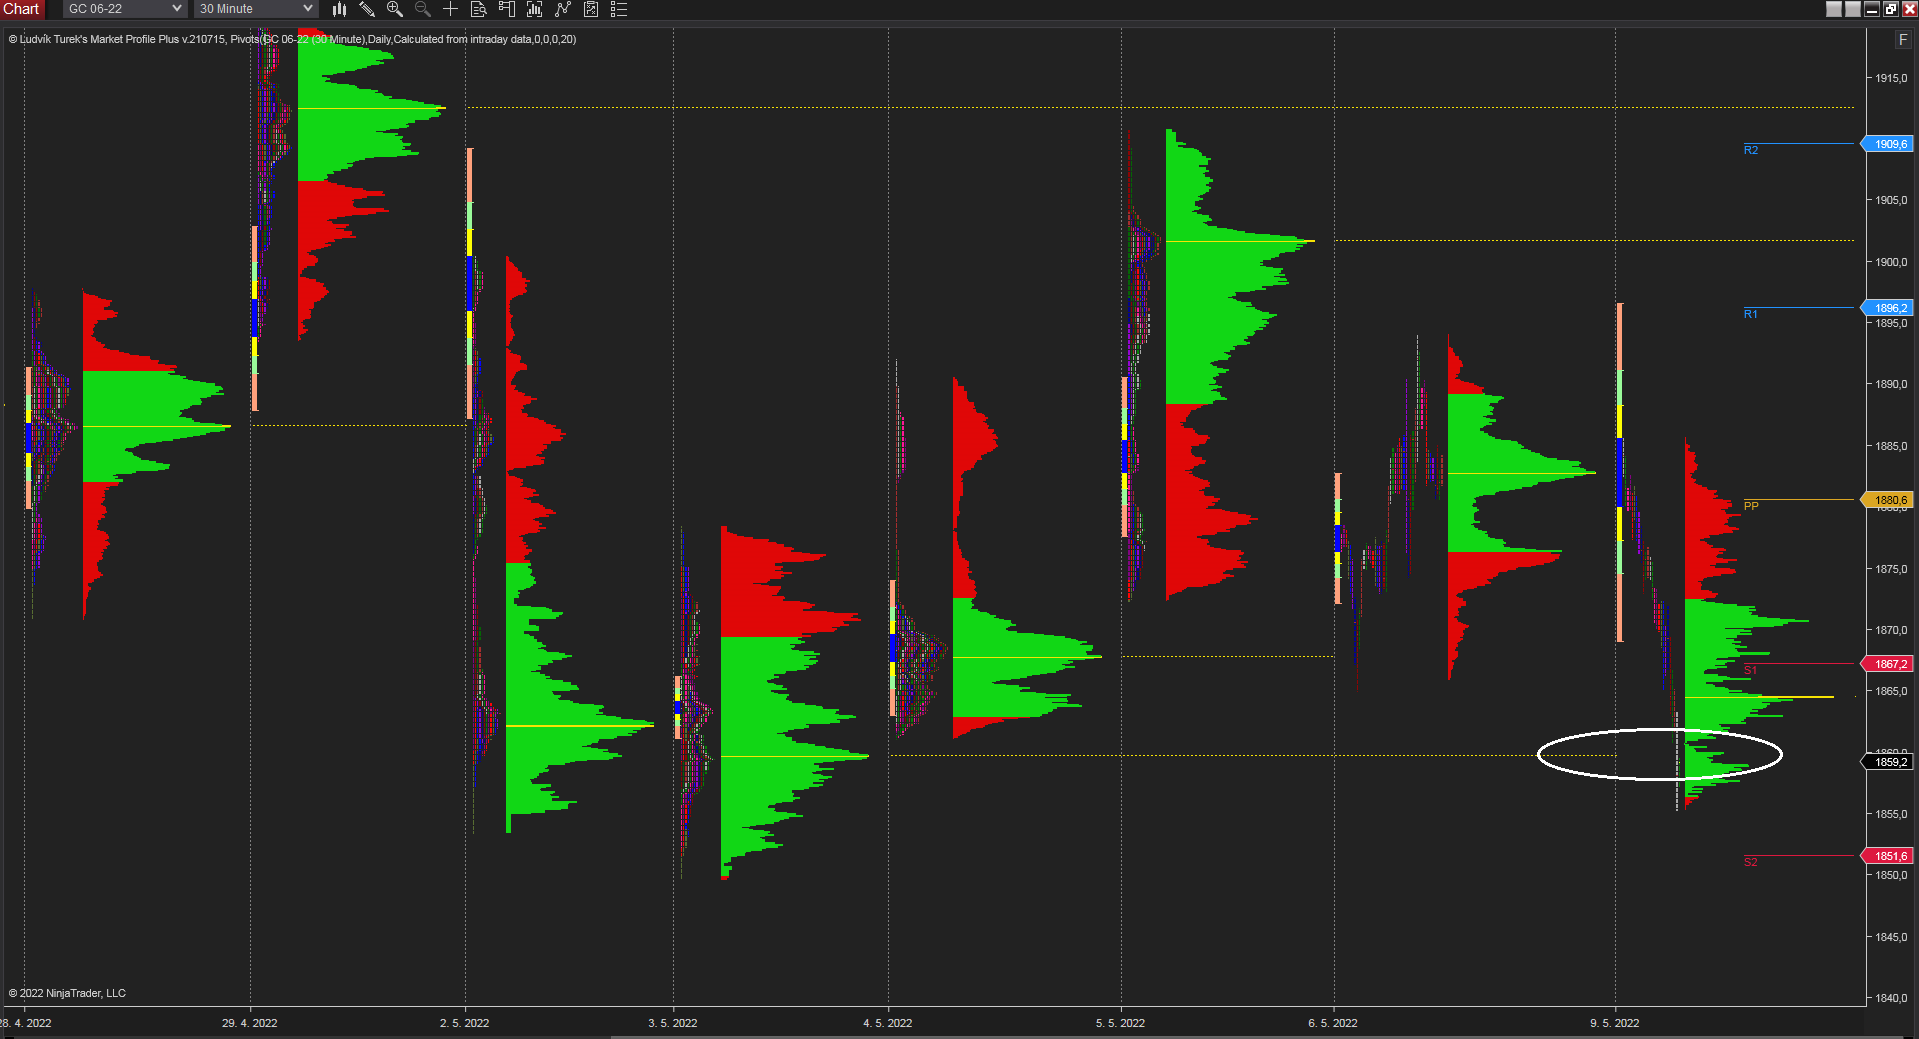 30 minutes chart of GC, Daily Market profile. Source: Author's analysis